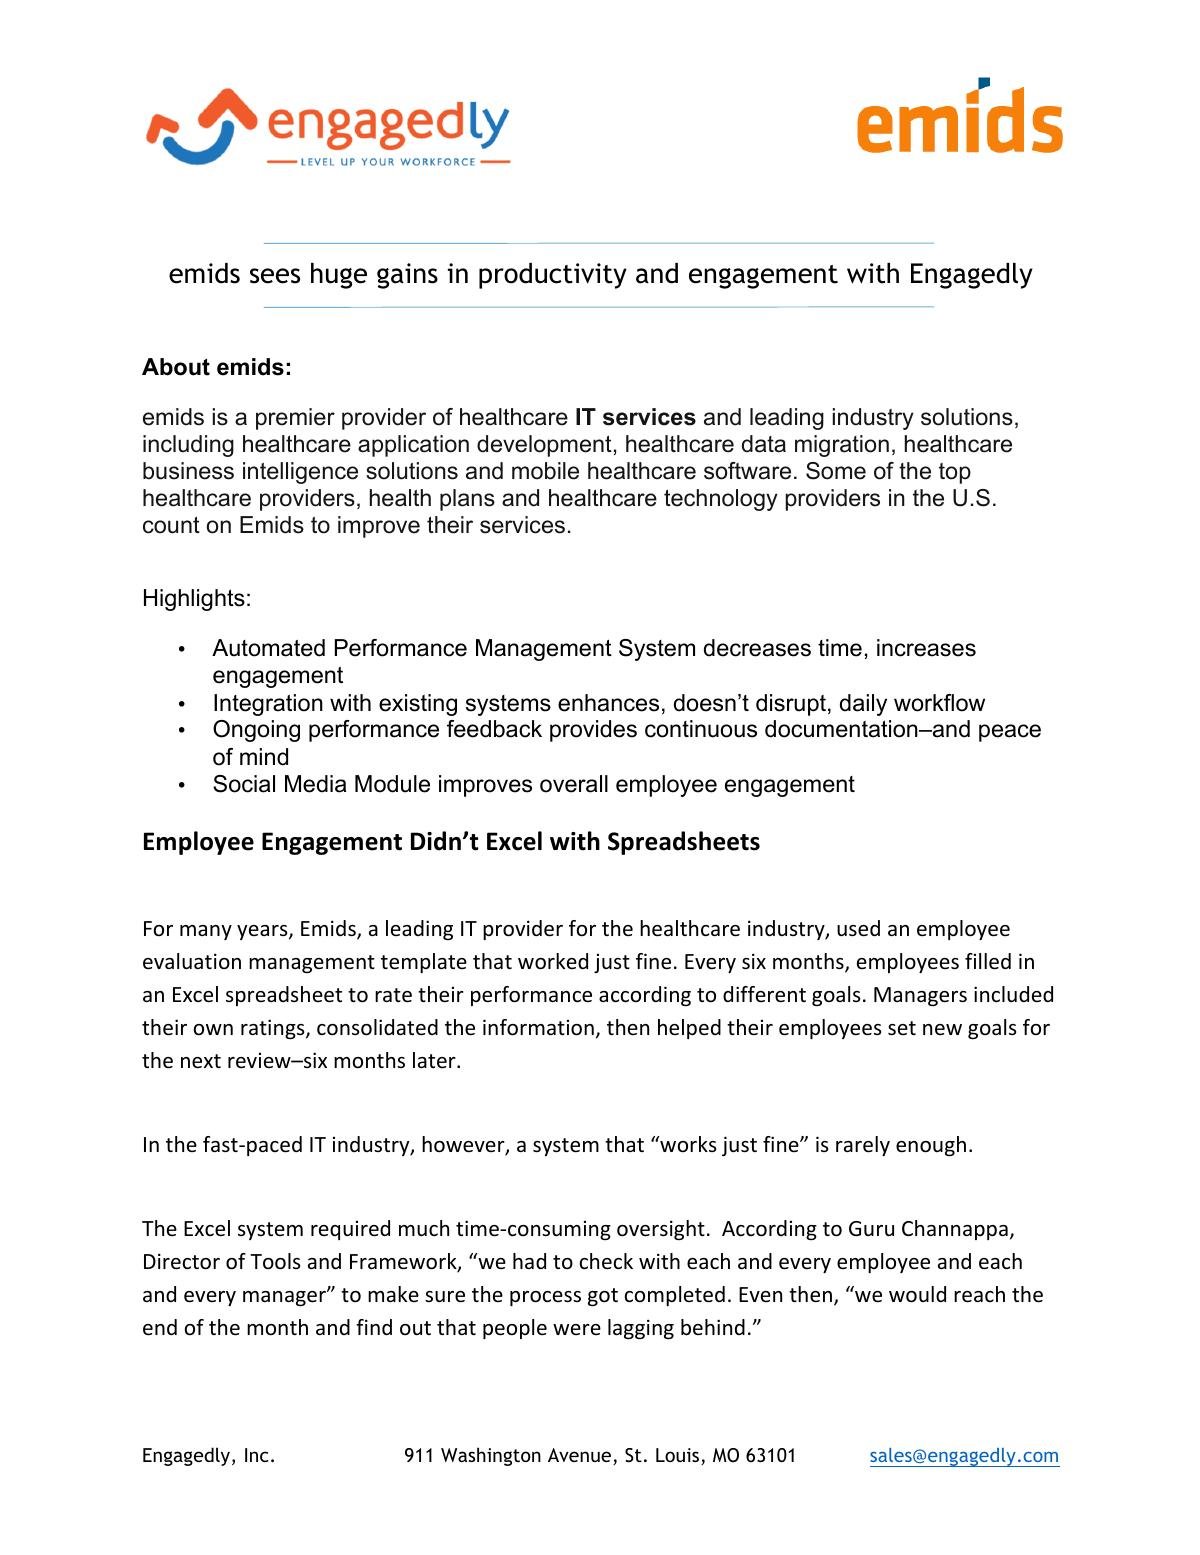 Best Practices for Improving Employee Engagement